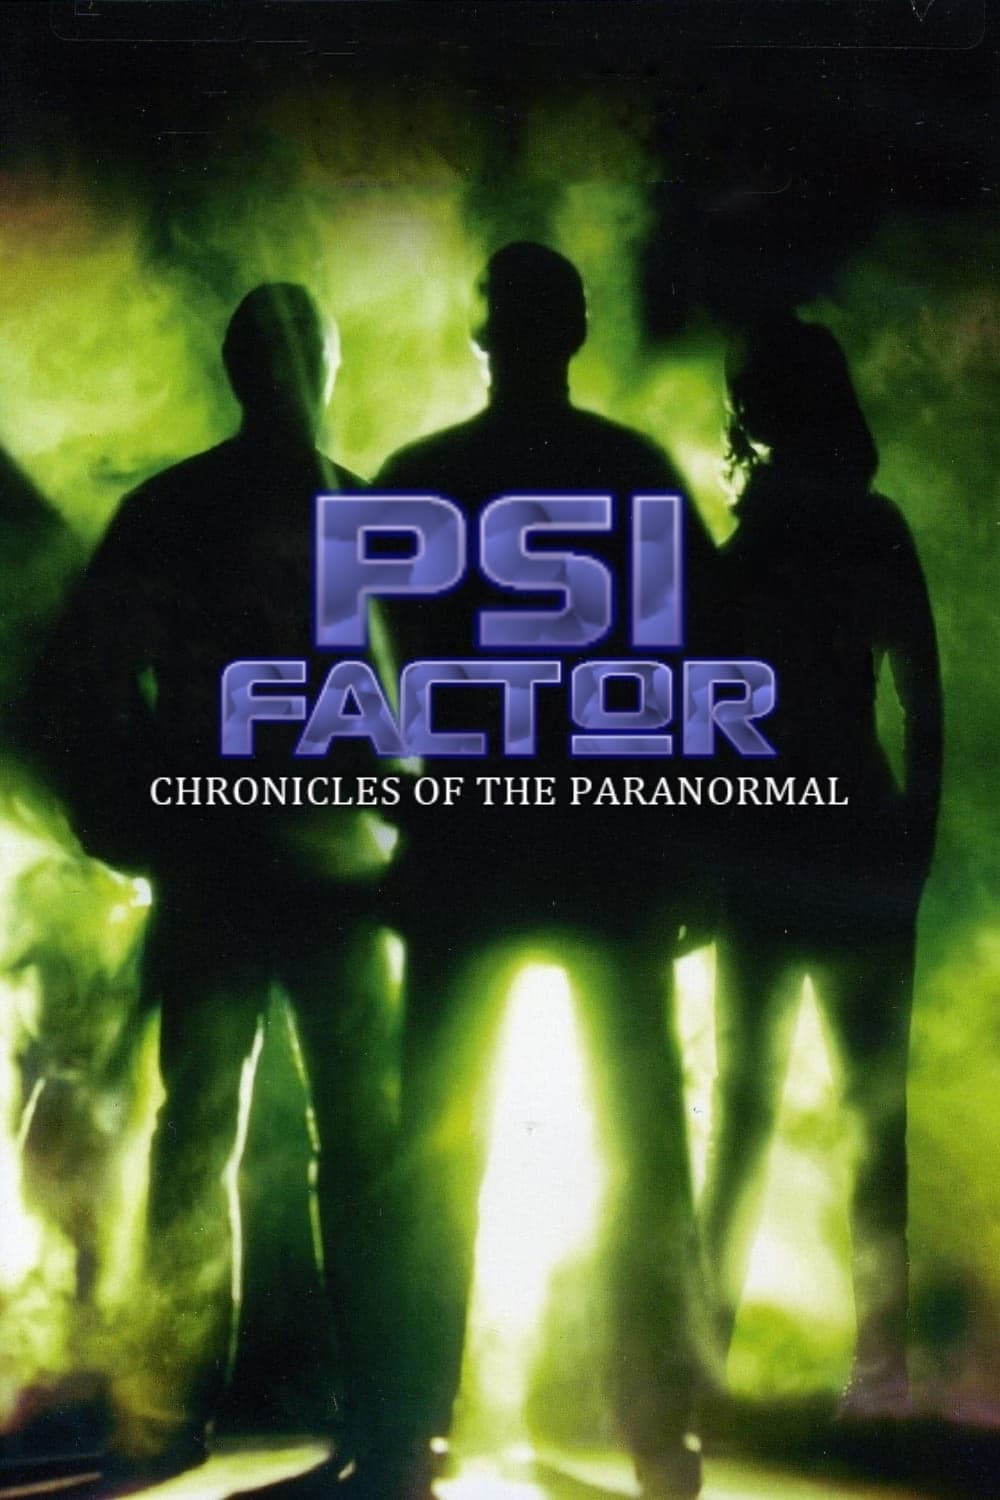 Psi Factor: Chronicles of the Paranormal (1996)